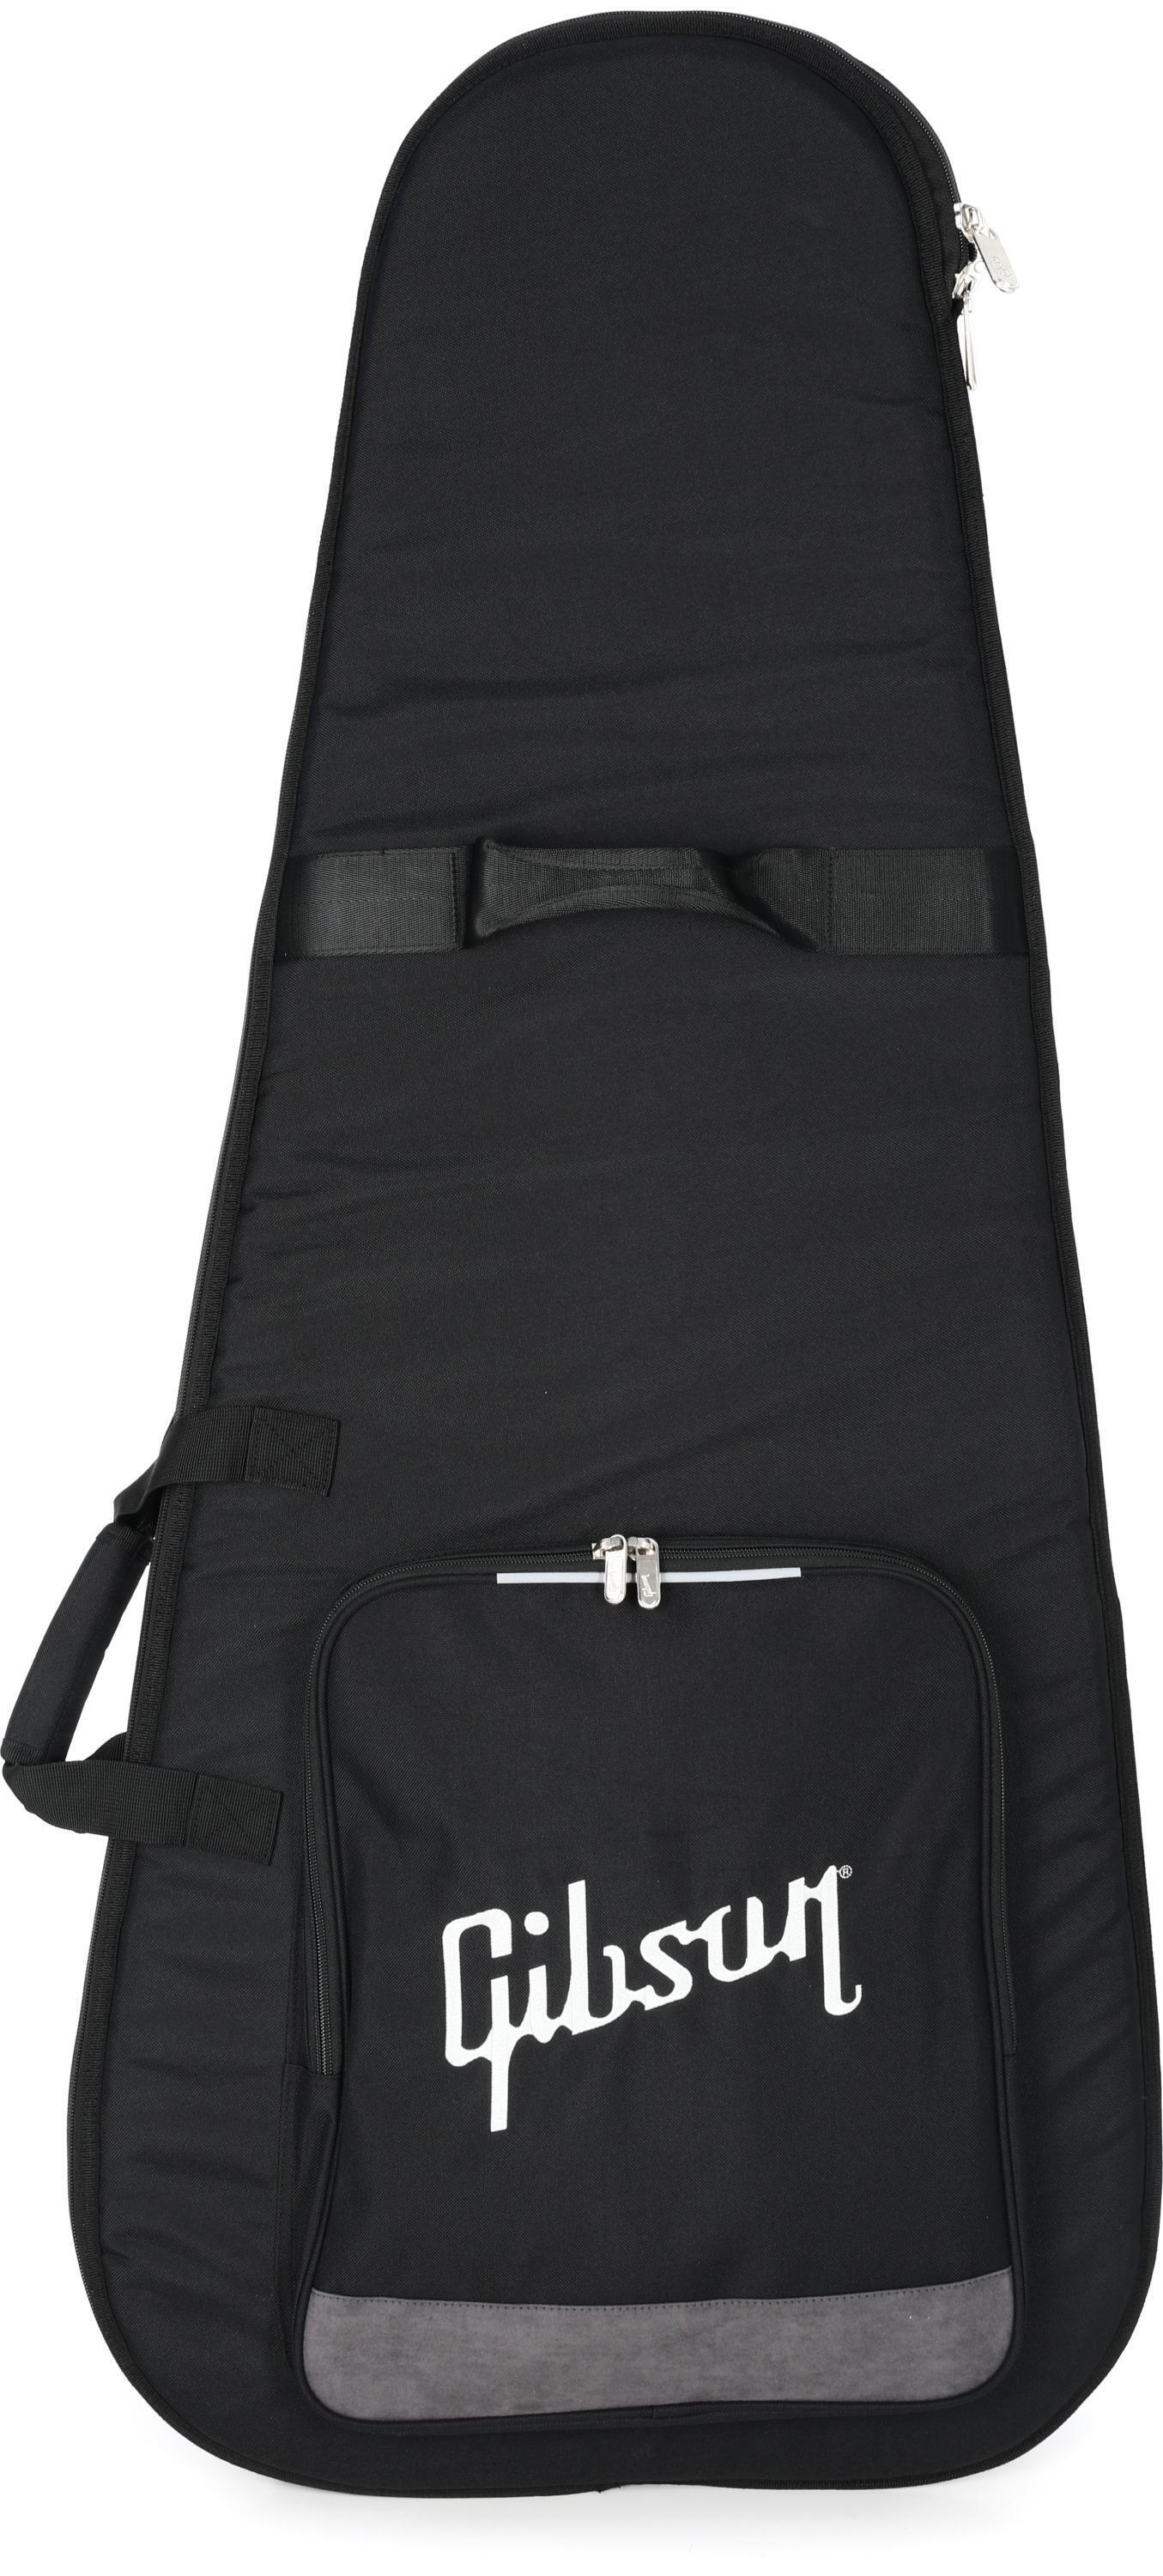 PRS Signature Gig Bag – PRS Guitars West Street East Accessory Store